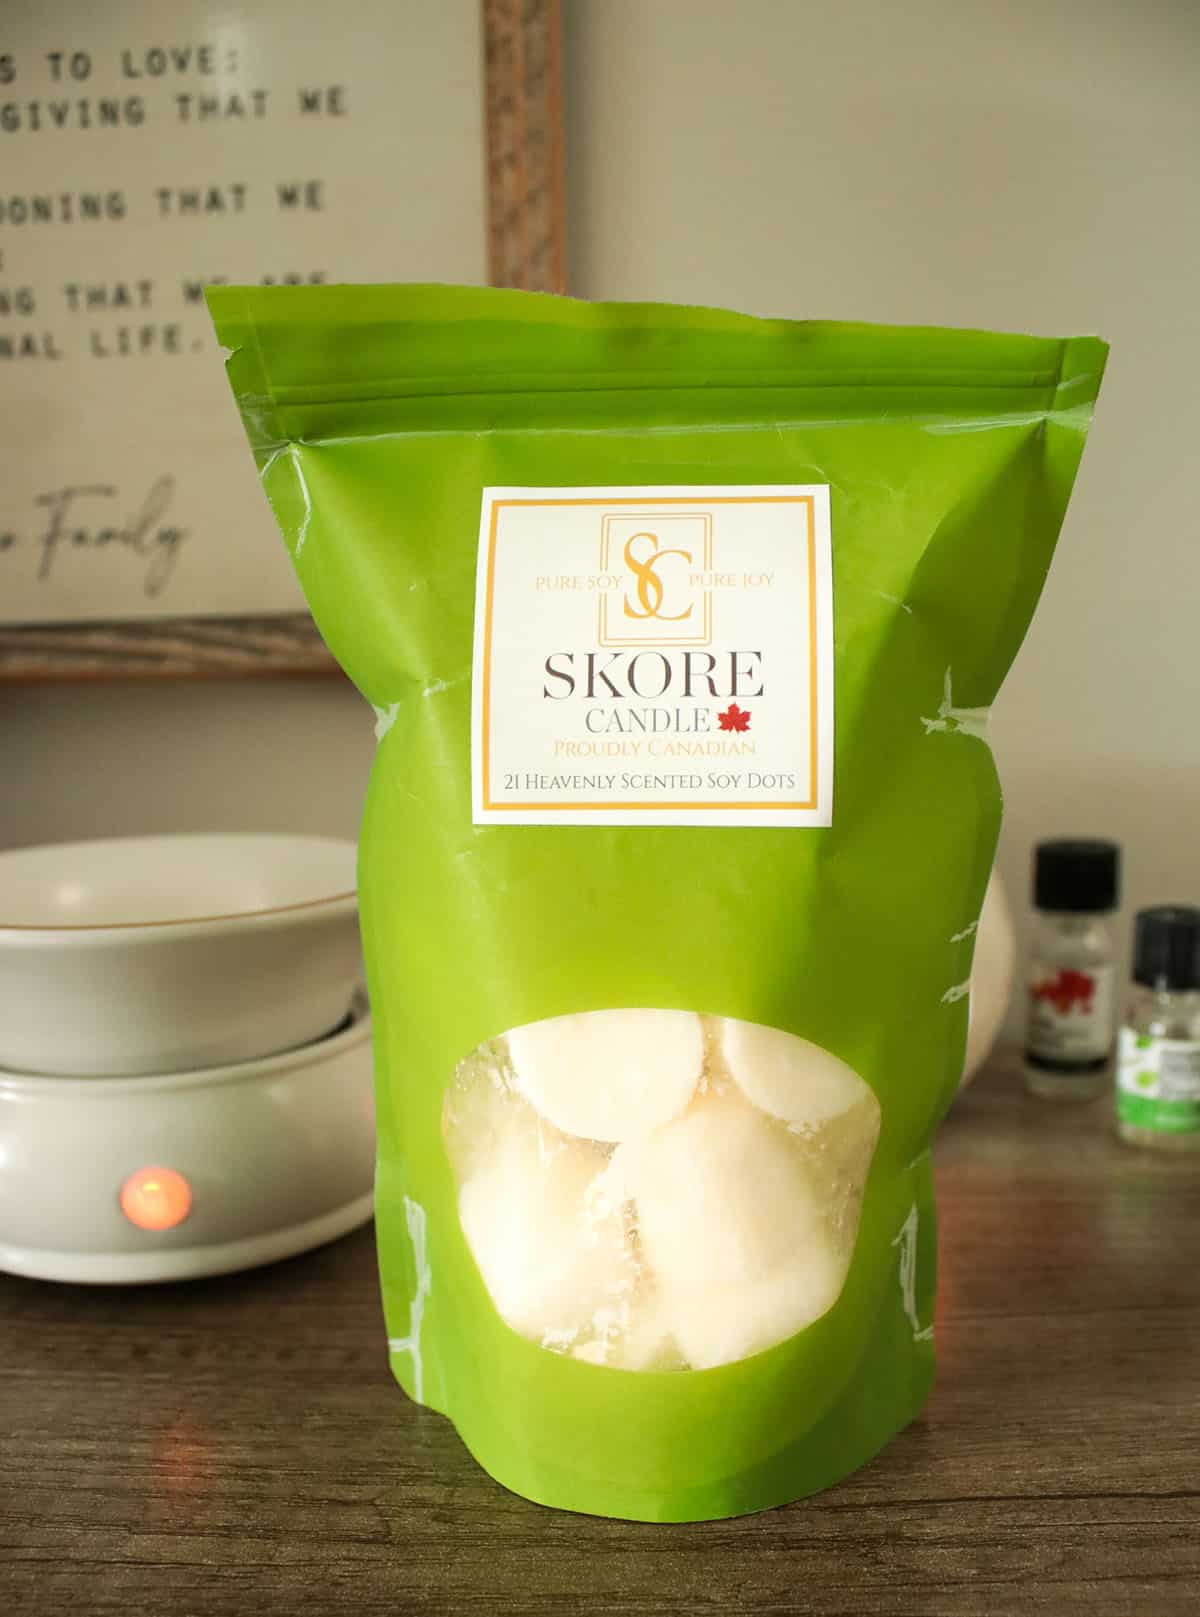 Skore candle soya dots.